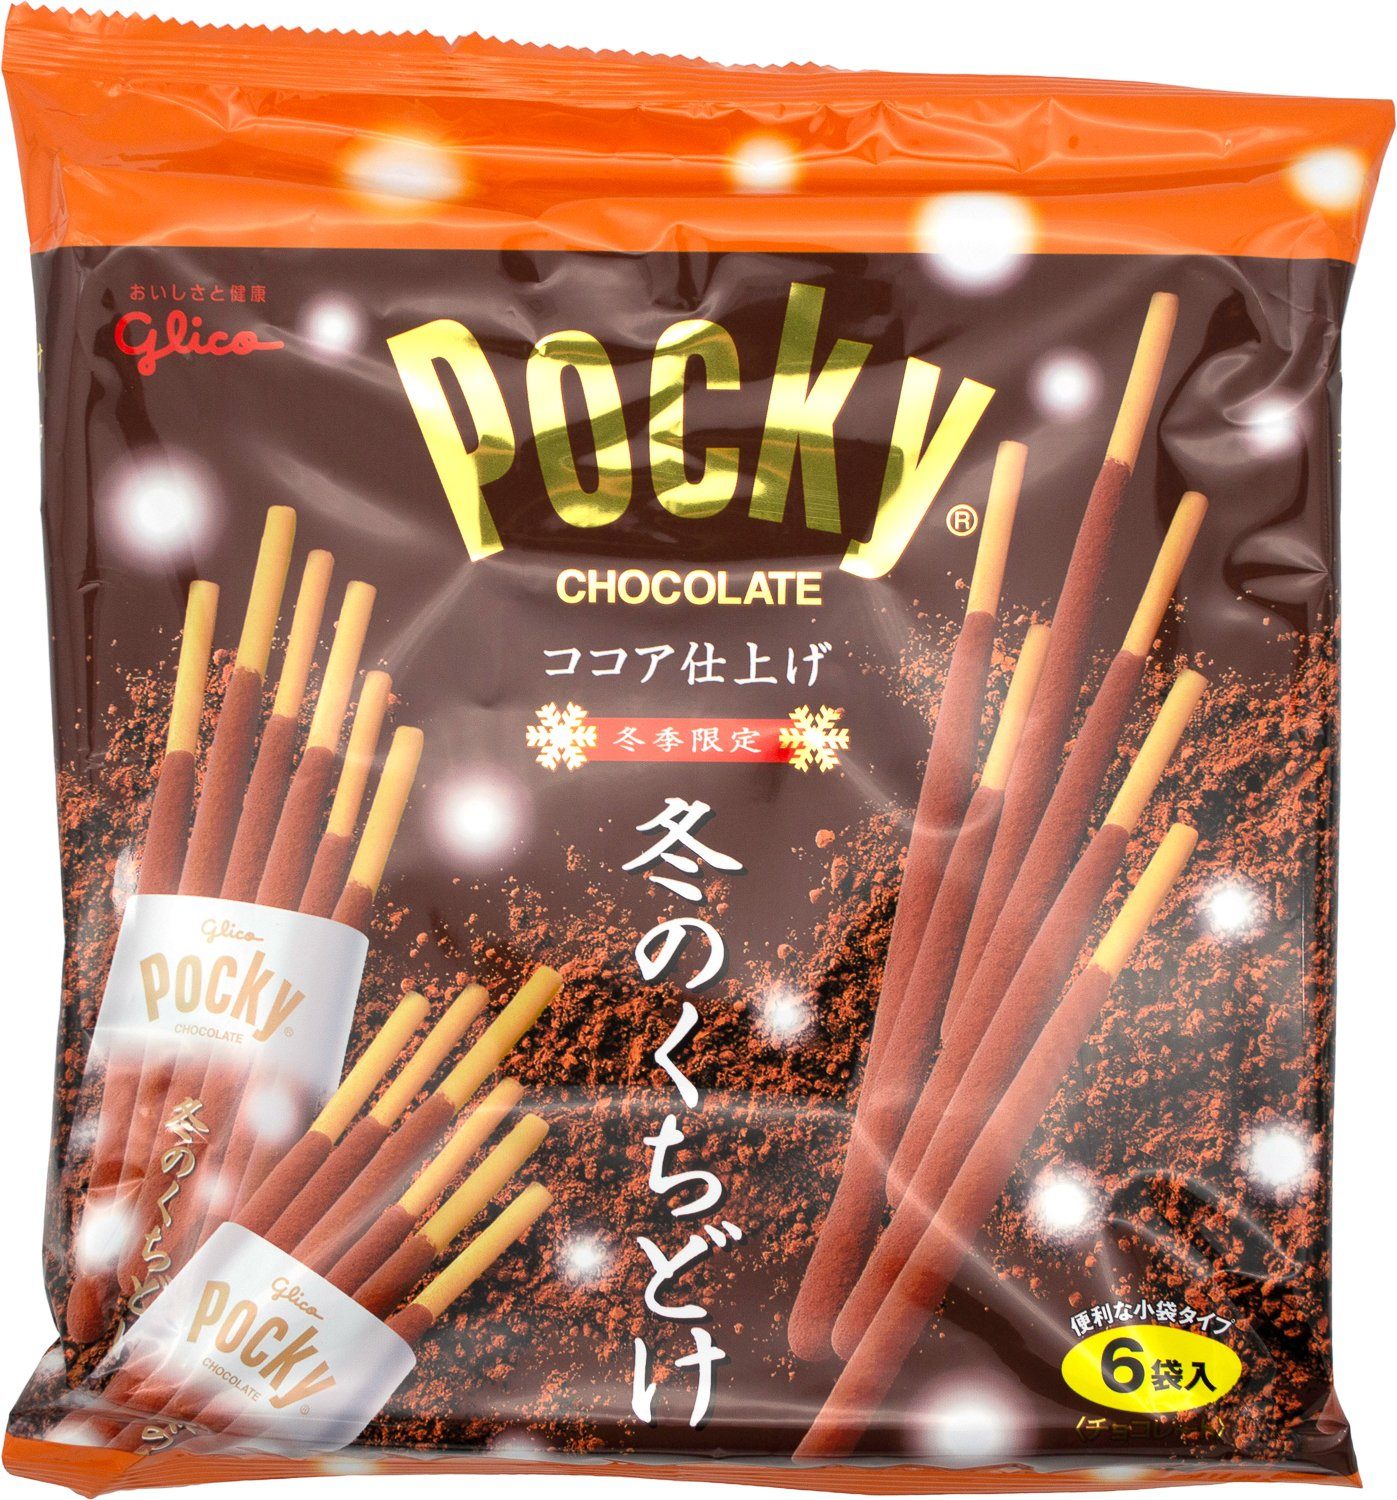 Pocky Cream Covered Biscuit Sticks Glico Winter Melty 4.62 Ounce 